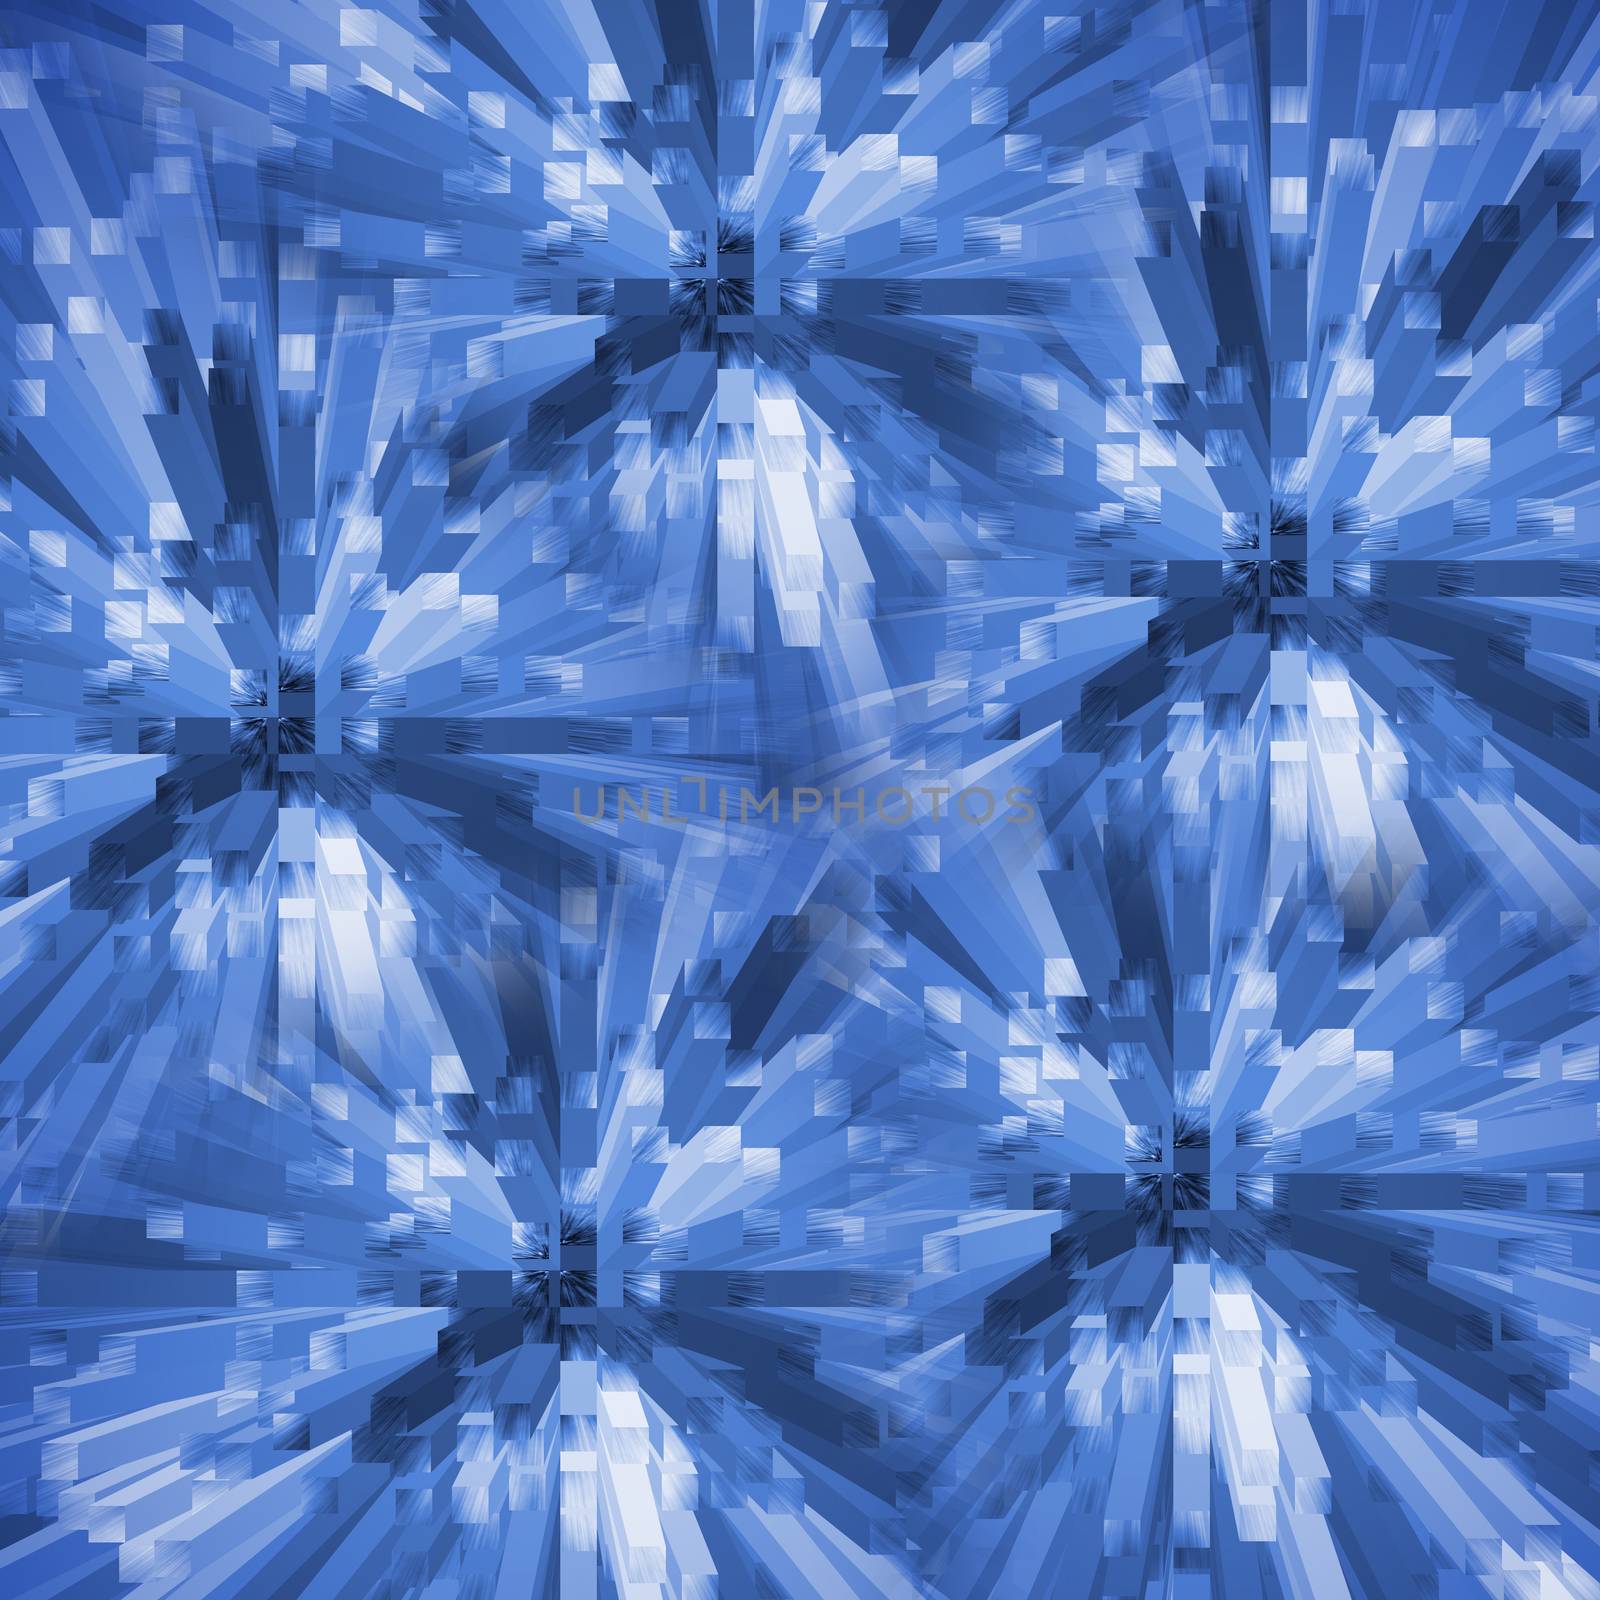 Beautiful abstract image in blue tones with the effect of three-dimensional blocks.